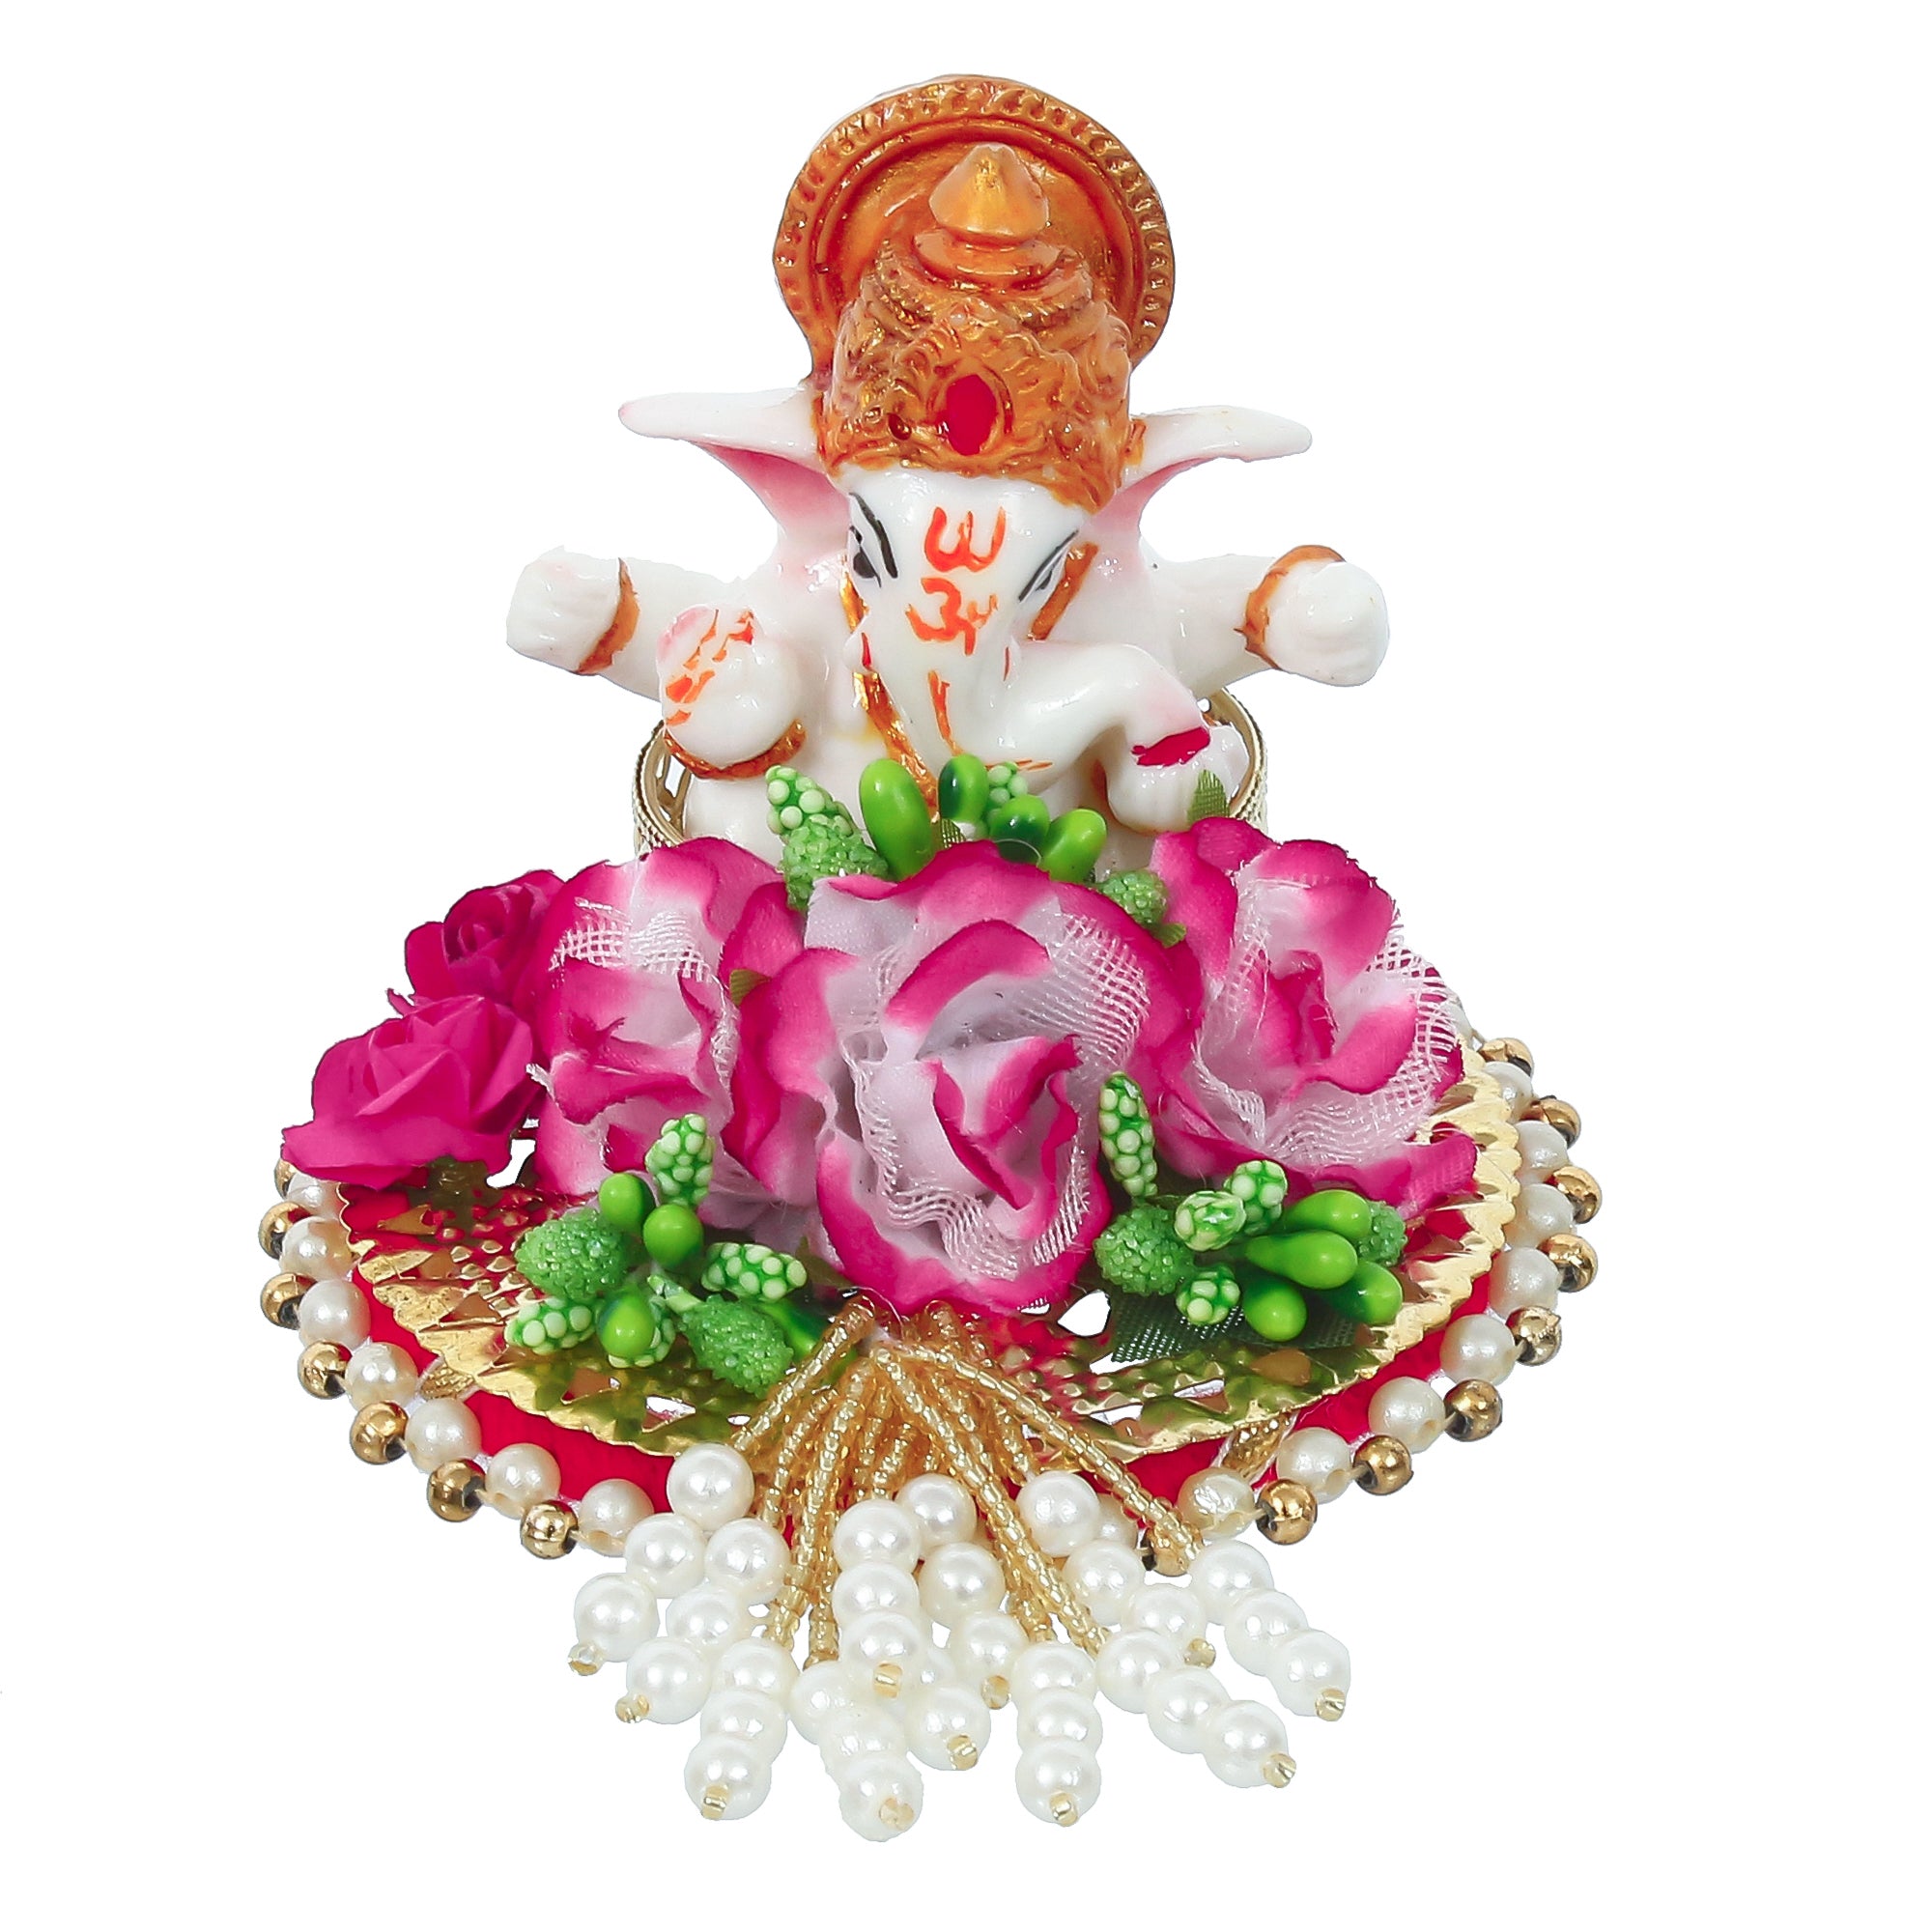 Lord Ganesha Idol On Decorative Handcrafted Colorful Flowers Plate 4